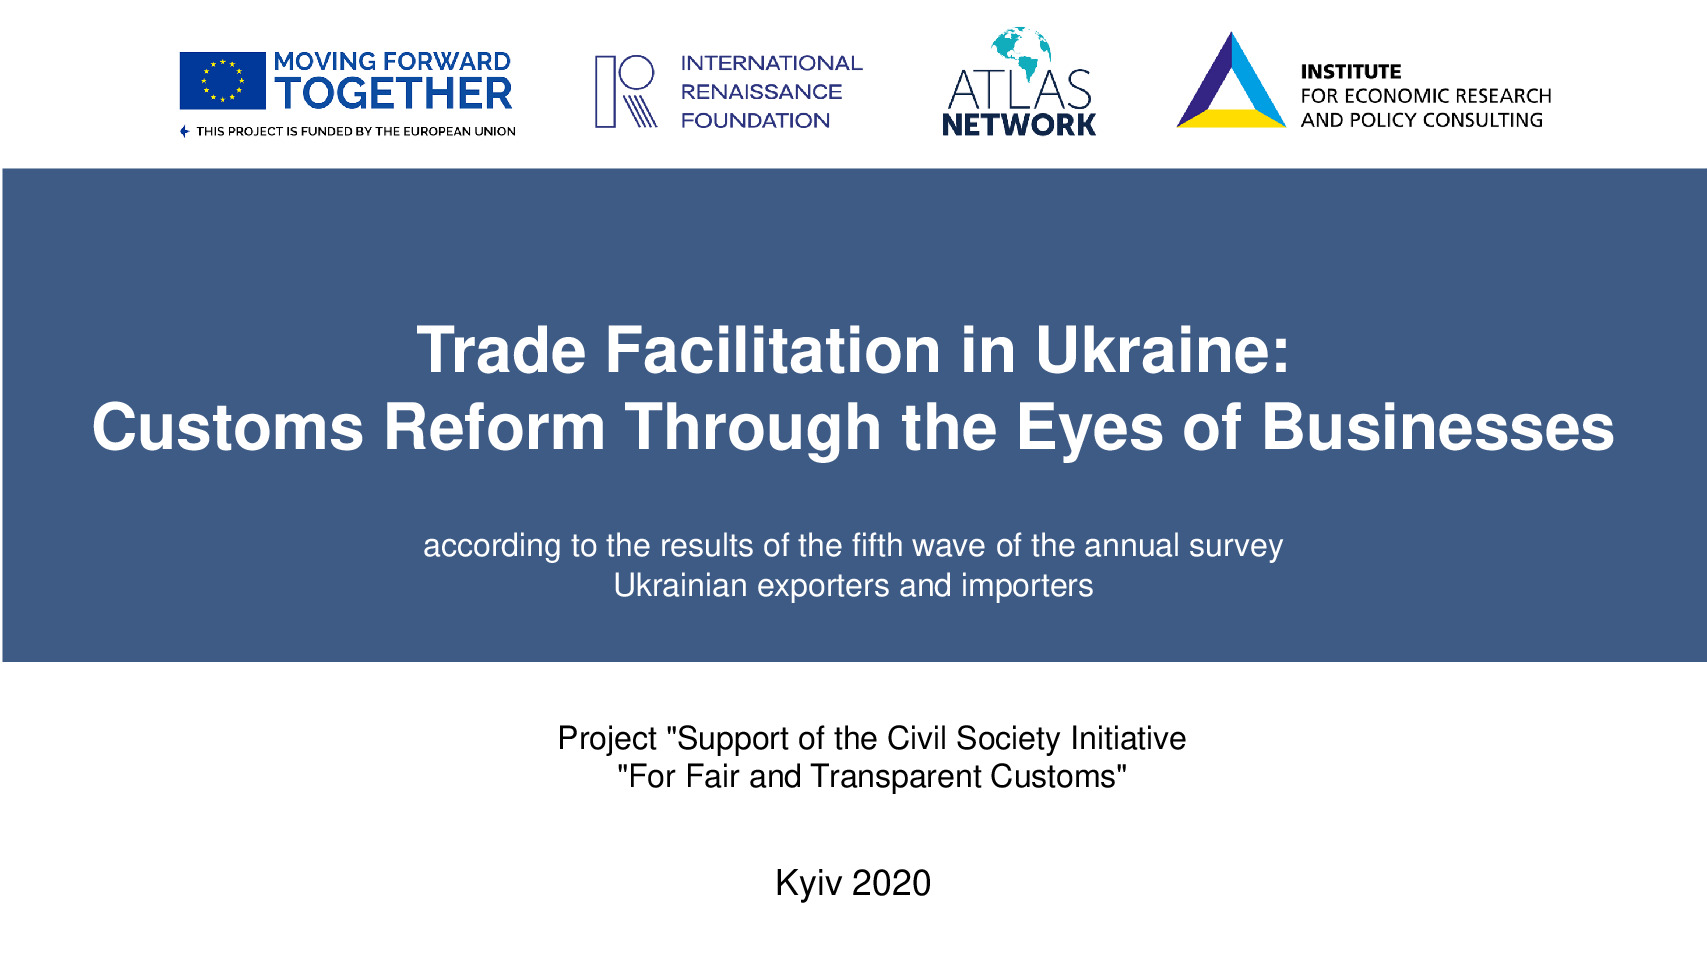 thumbnail of TFD_Presentation_Customs Reform Through the Eyes of Businesses_eng_cor1